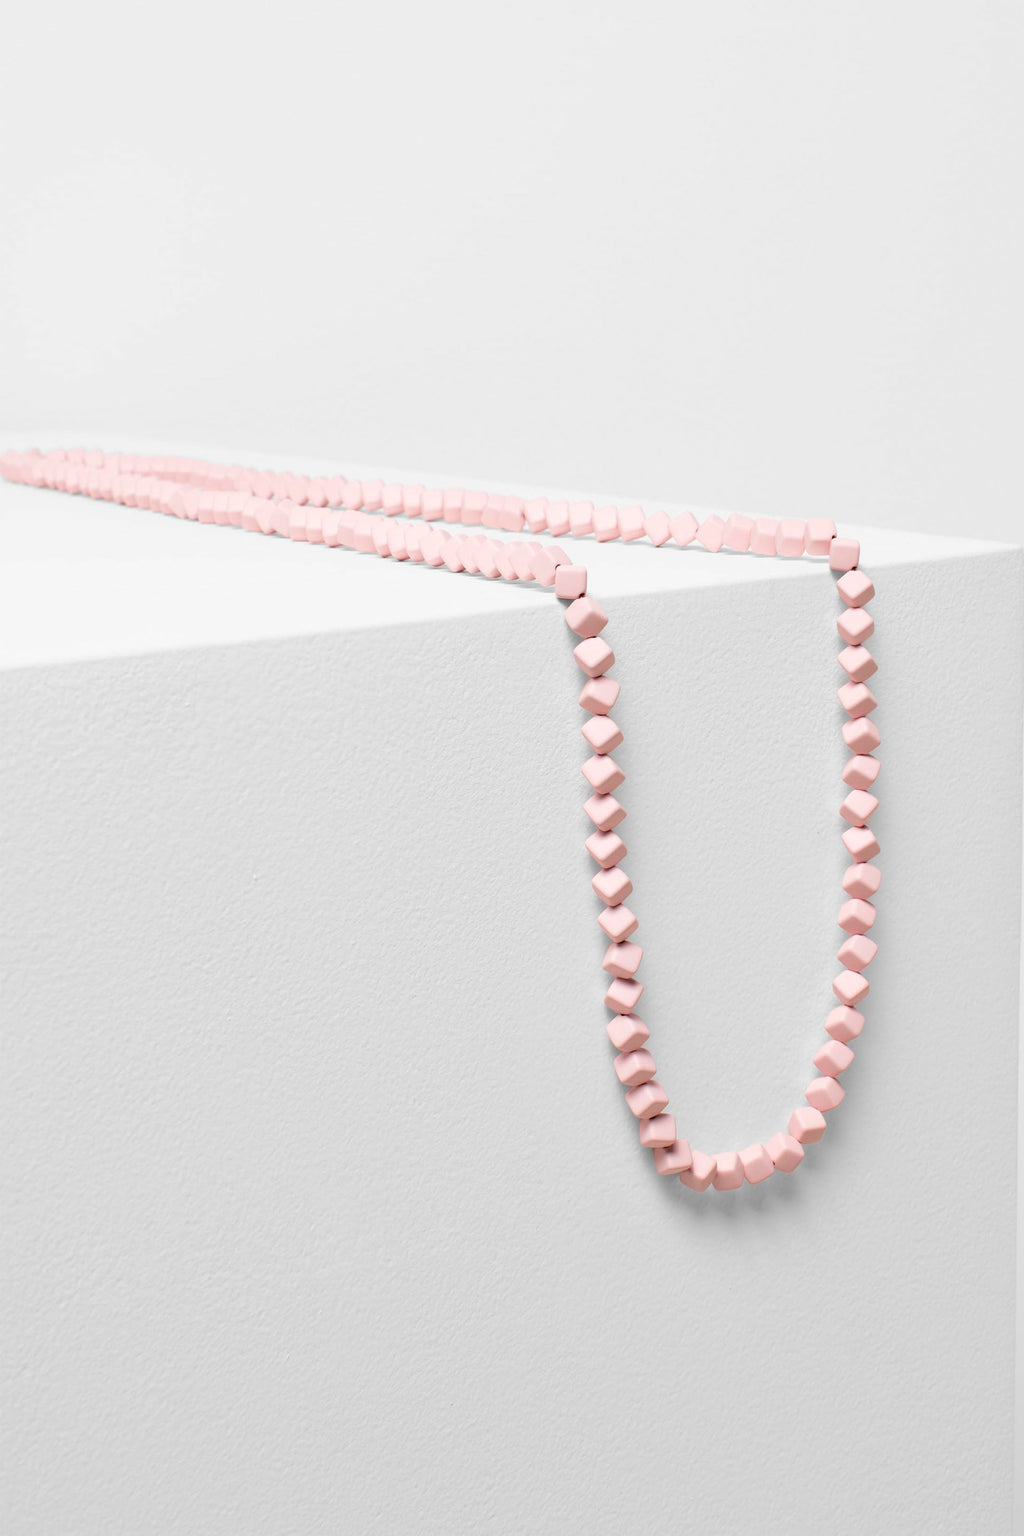 Solle Necklace in Pink by Elk the Label